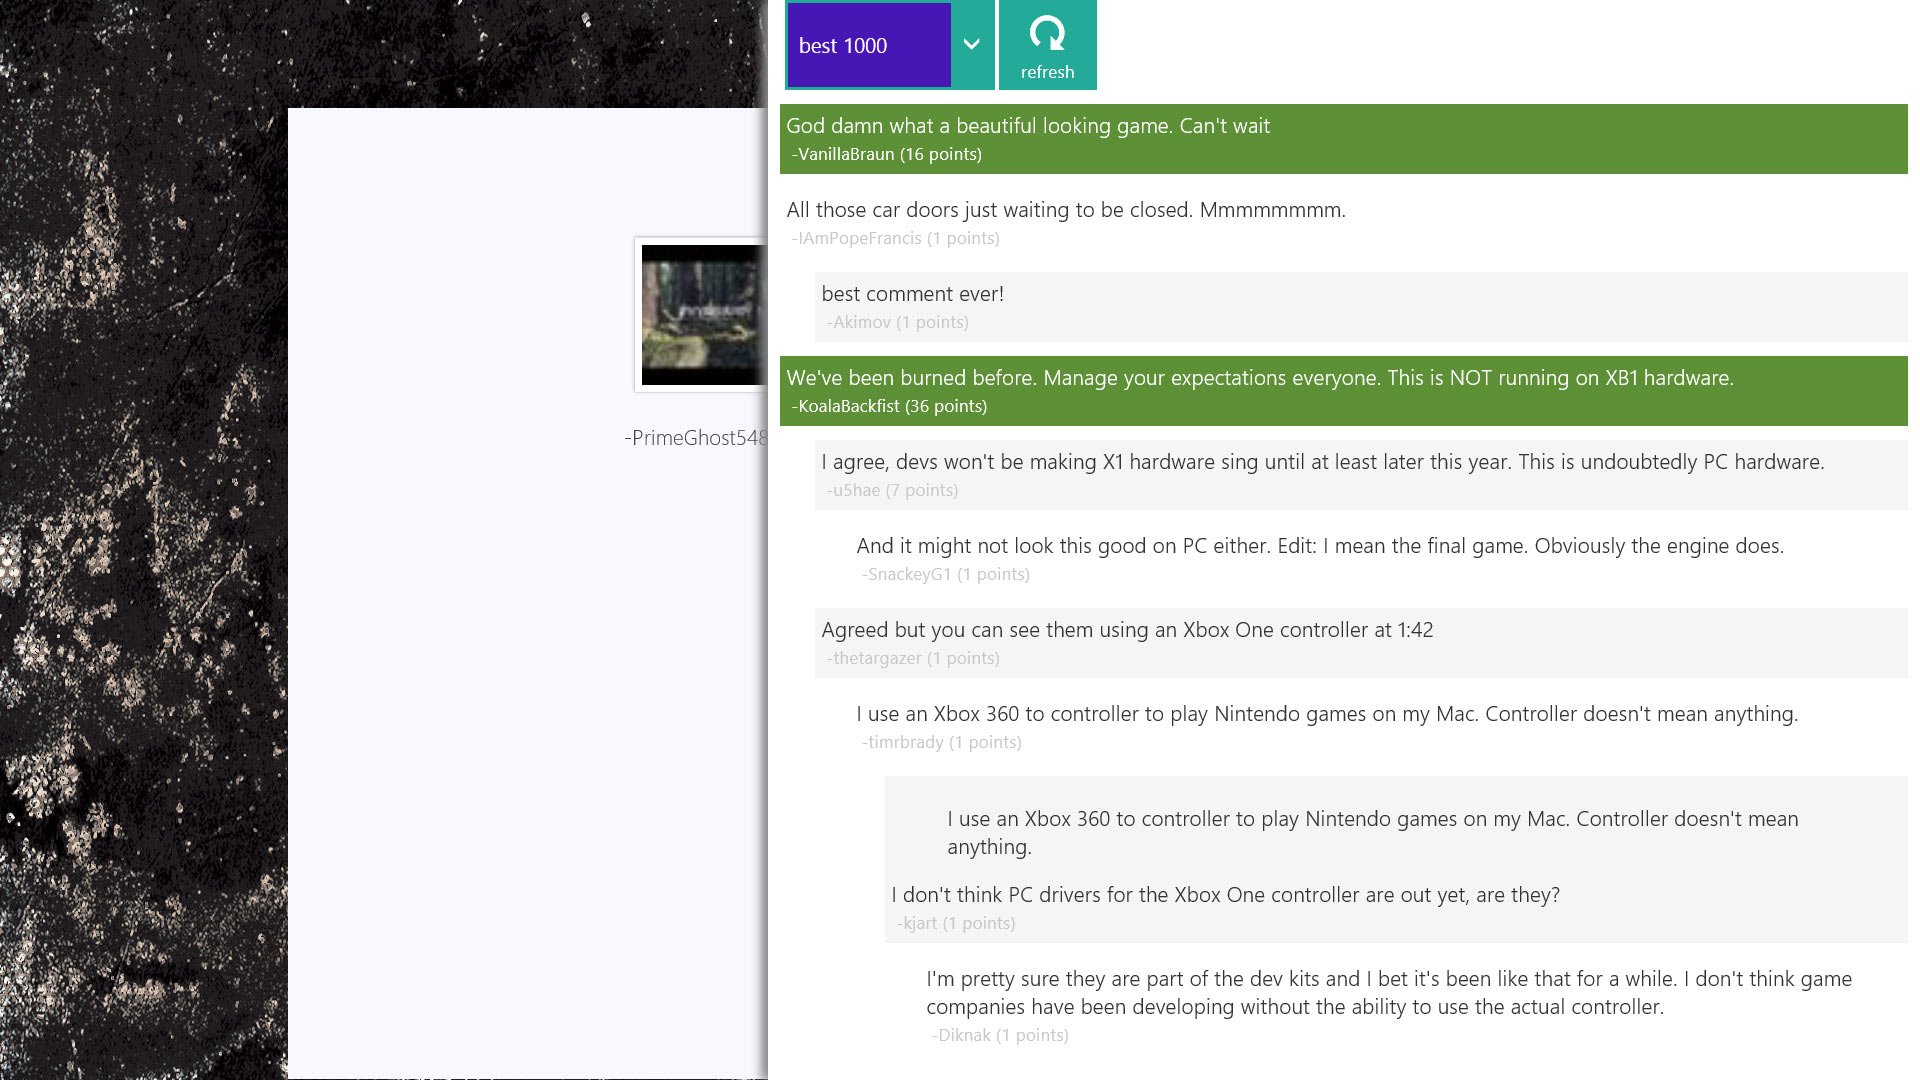 Reddit For Windows 8 Is A Beautiful And Functional App For Browsing Reddit Windows Central